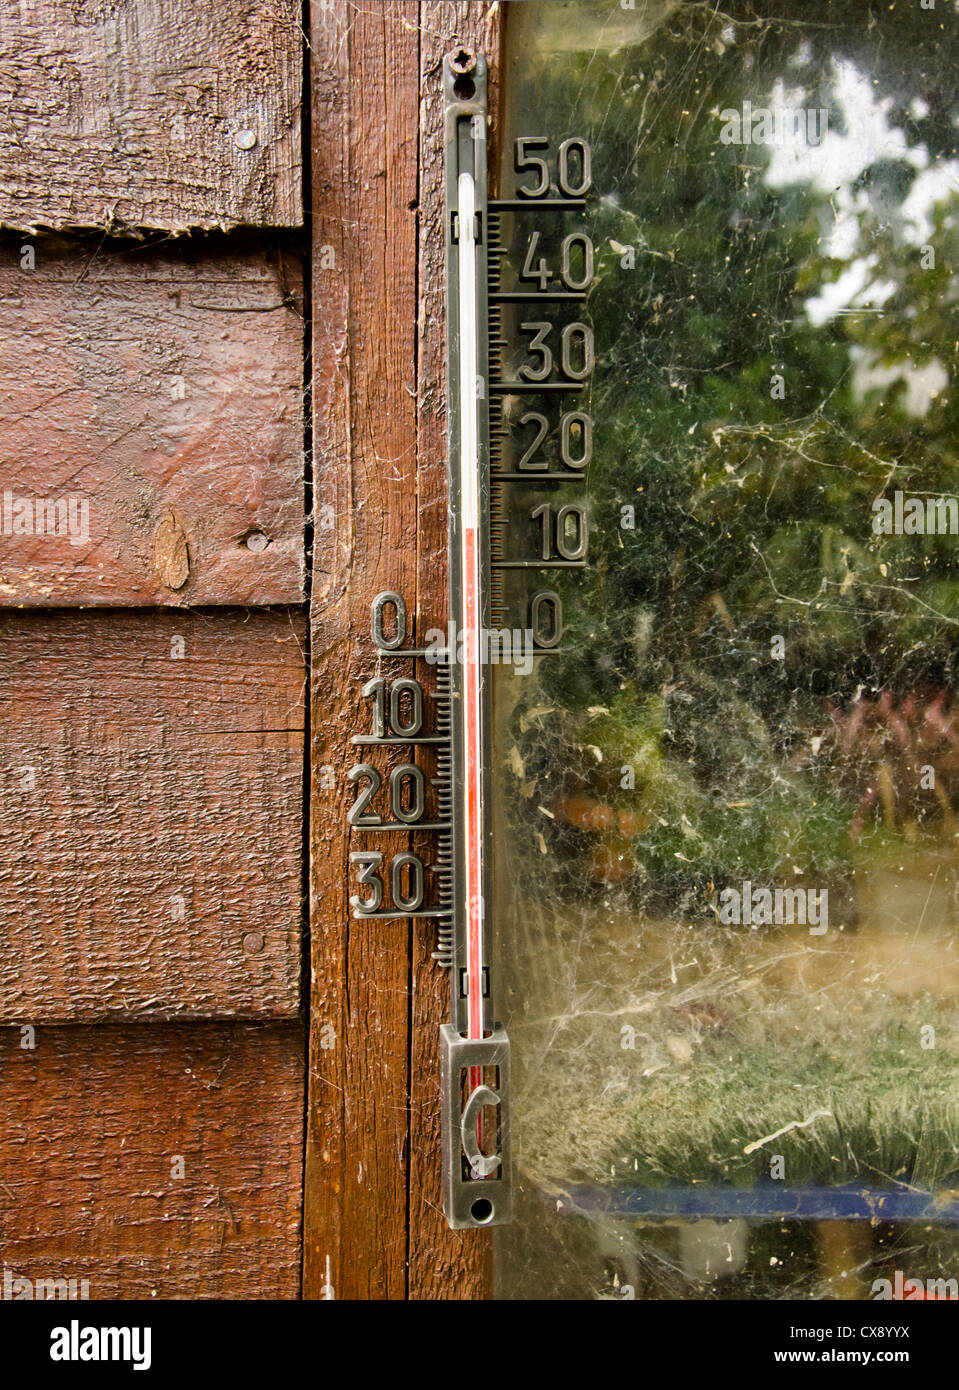 https://c8.alamy.com/comp/CX8YYX/an-outdoor-thermometer-hanging-on-the-wall-of-a-wooden-garden-shed-CX8YYX.jpg